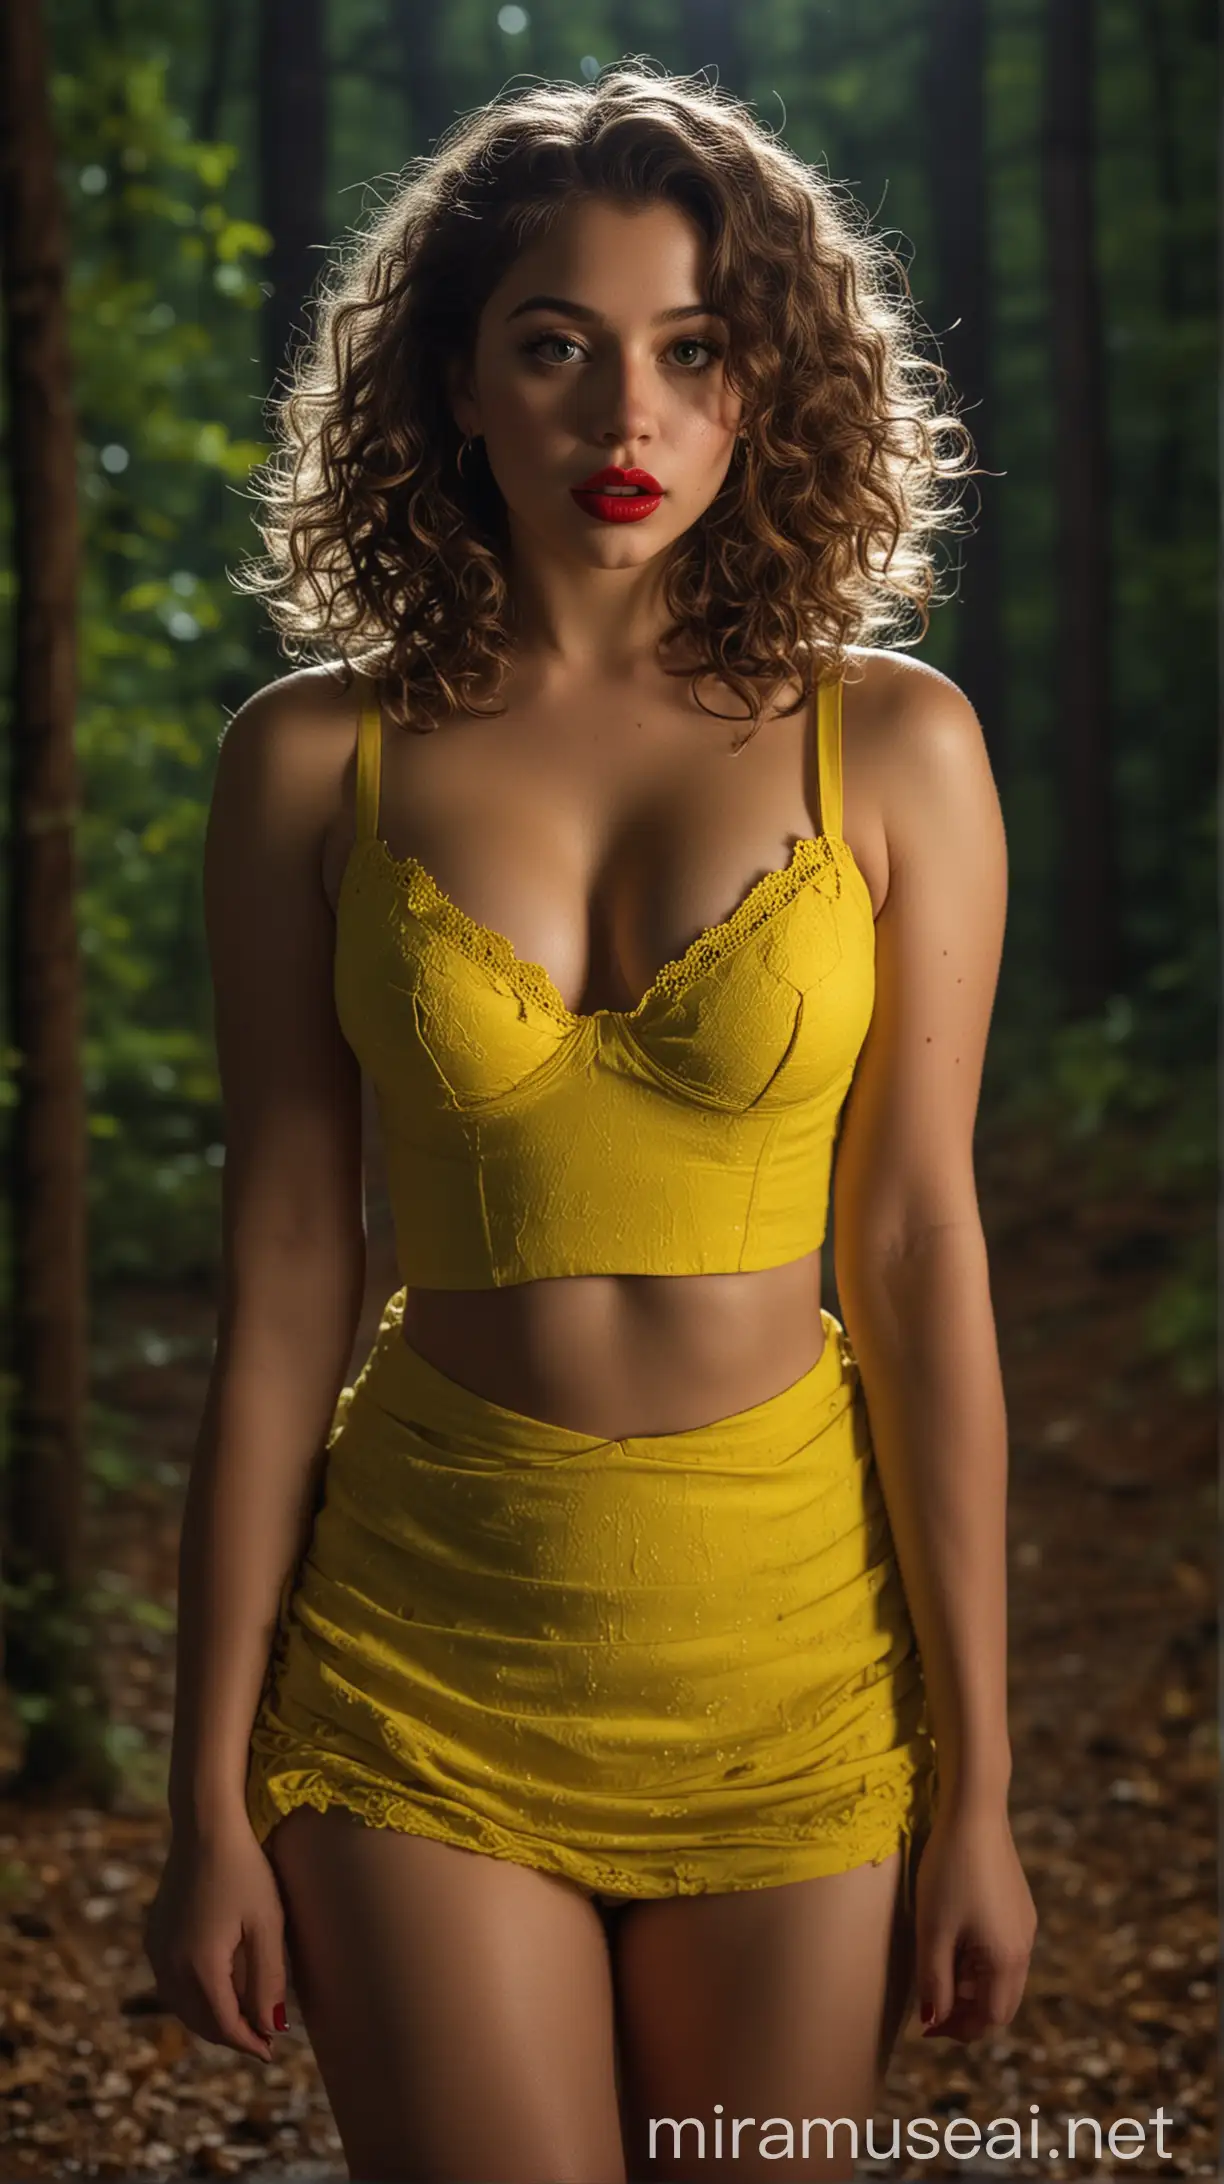 Beautiful USA Girl with Red Lipstick and Nose Ring in Enchanting Forest Night Scene